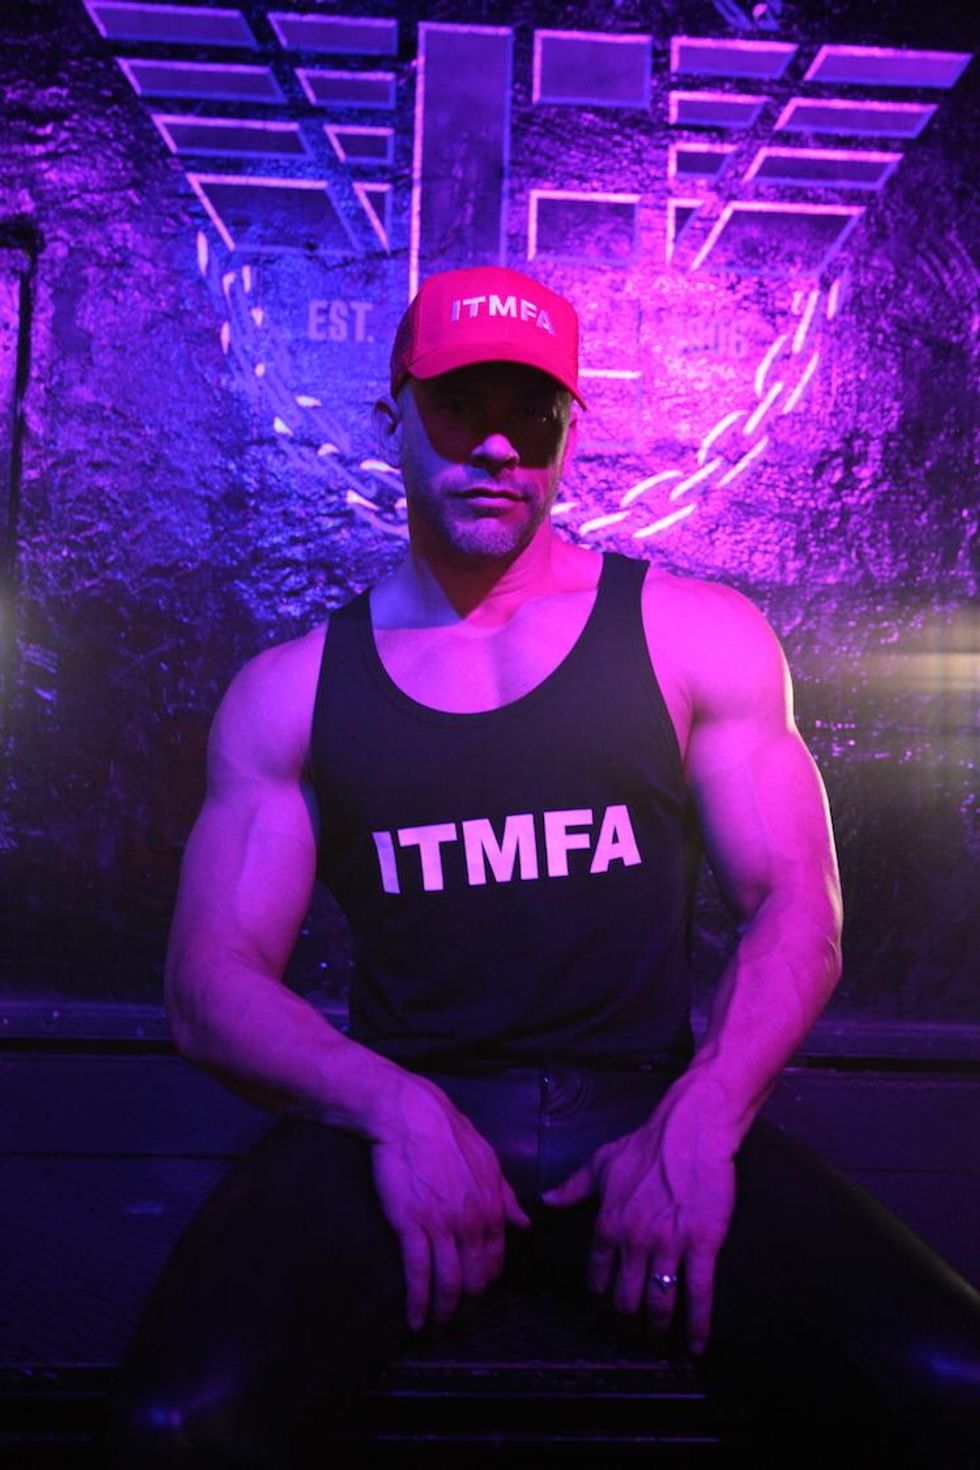 Check Out Steamy New Images From the Tom of Finland Store